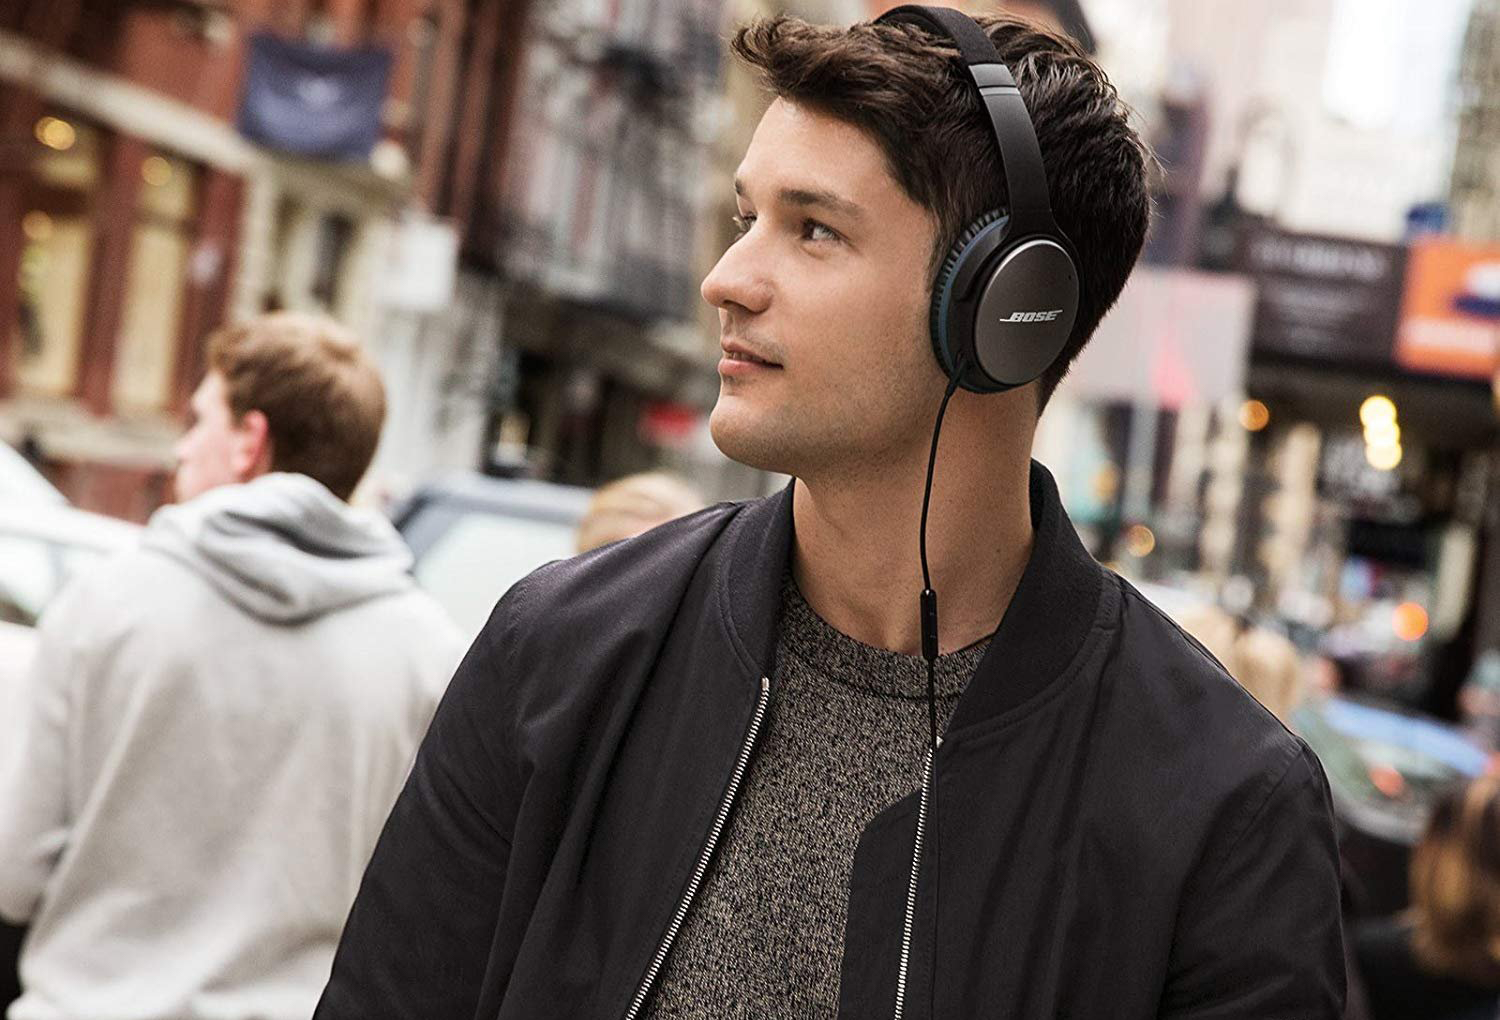 Bose S 2 Best Pairs Of Wired Headphones Are On Sale Starting At 49 Bgr